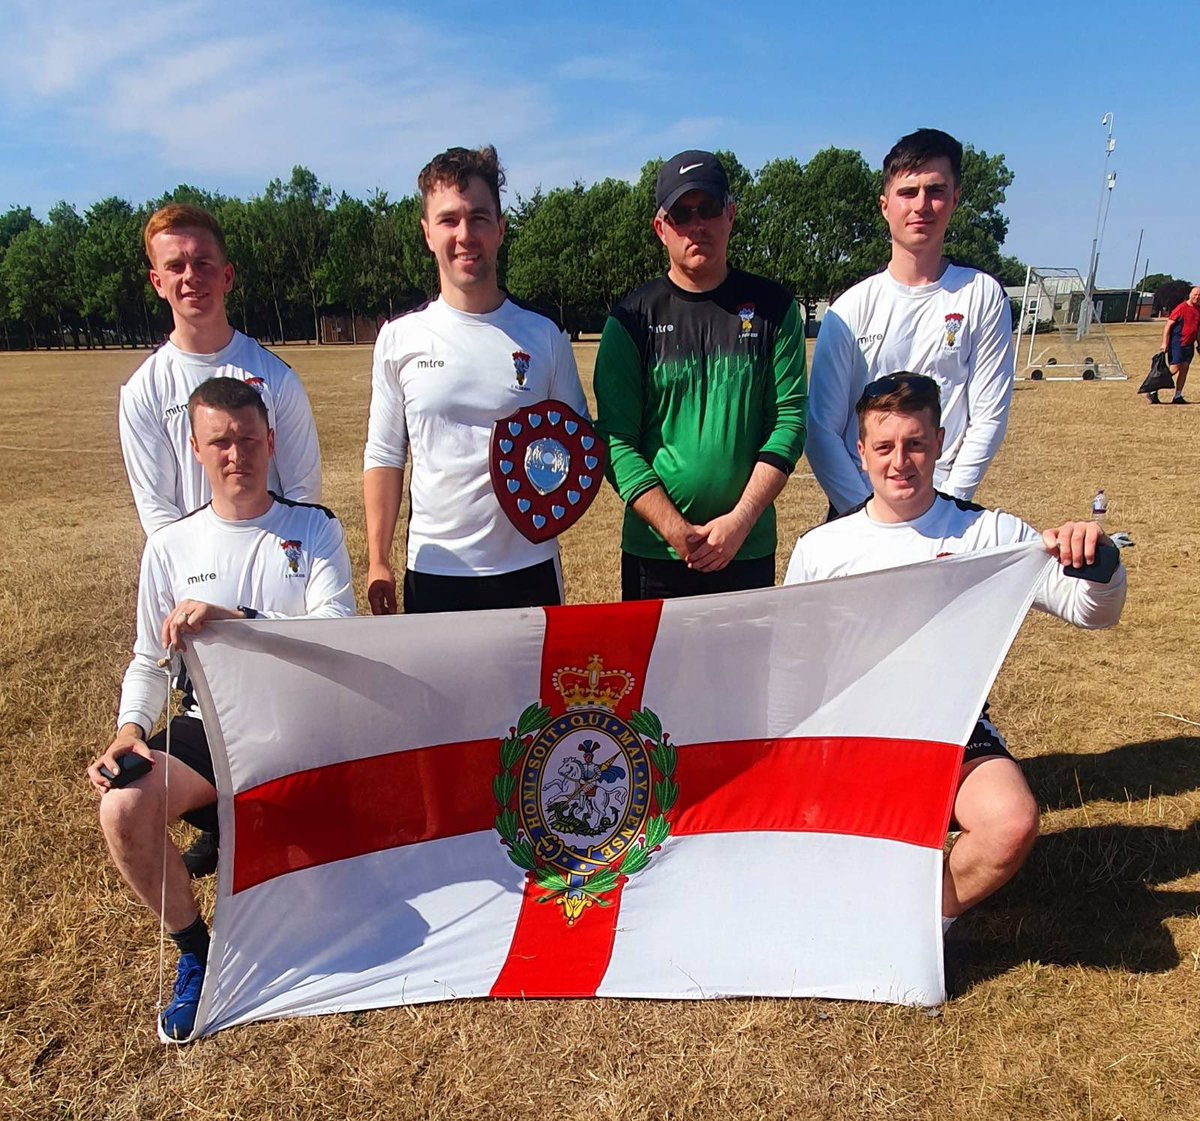 Army Reserve 6 a side Football Comp: Results report by Sgt Major “H” Hyman We beat 105 Royal Artillery in the Semi Final 2-1 and we beat Royal Yeomanry 4-0 in the final of the plate Cpl Clarke HQ scored 2 Cpl Archbold 1 & LCpl Young 1, Both Z Coy” Well done team!